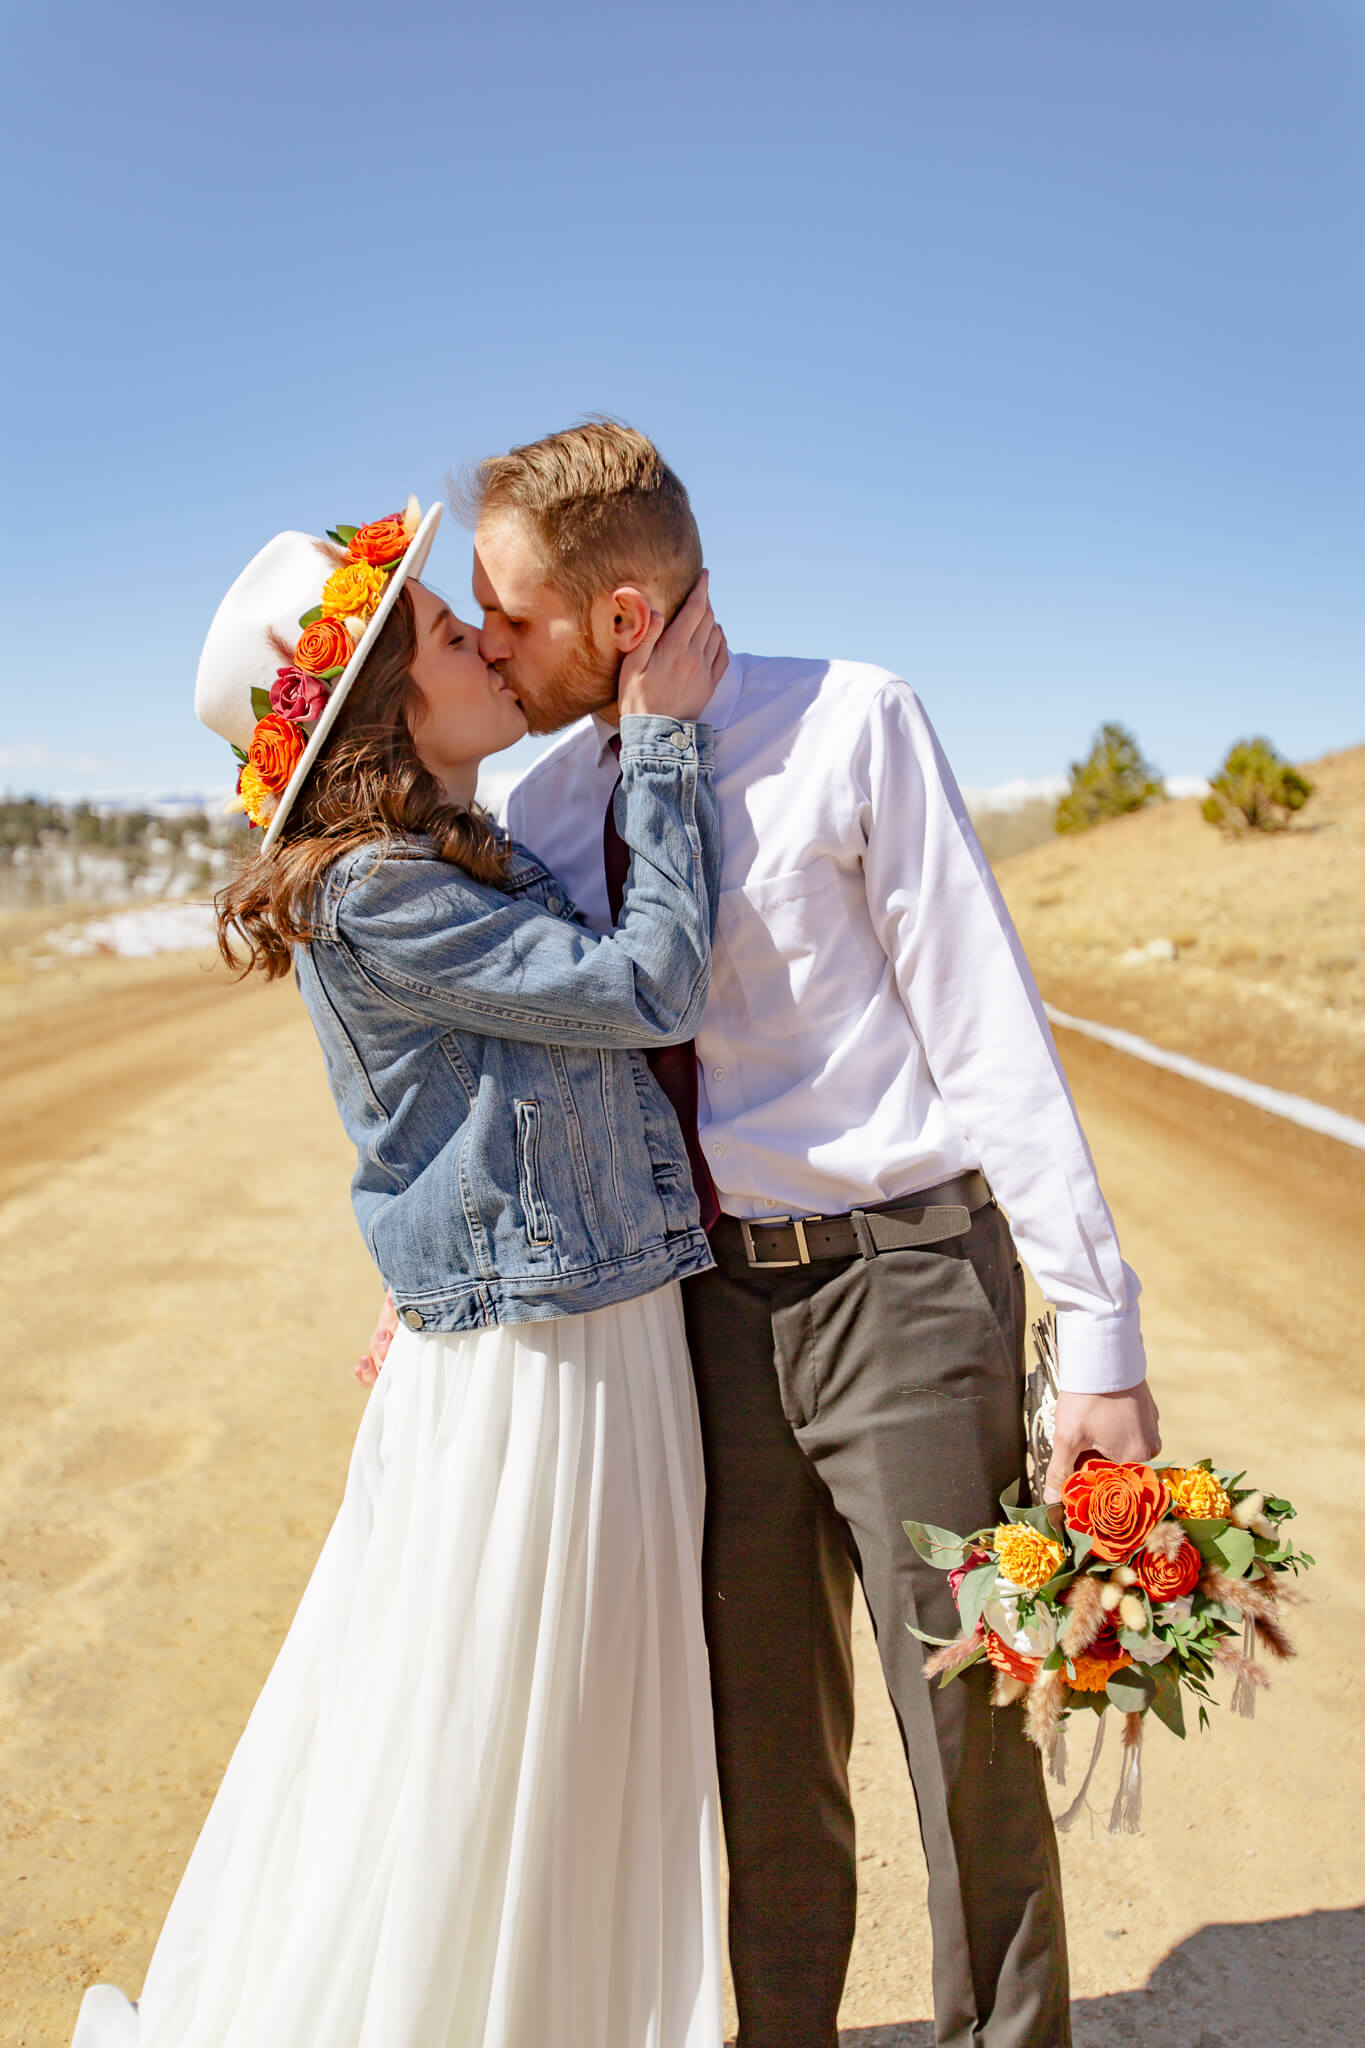 Couple kissing on a dirt road.